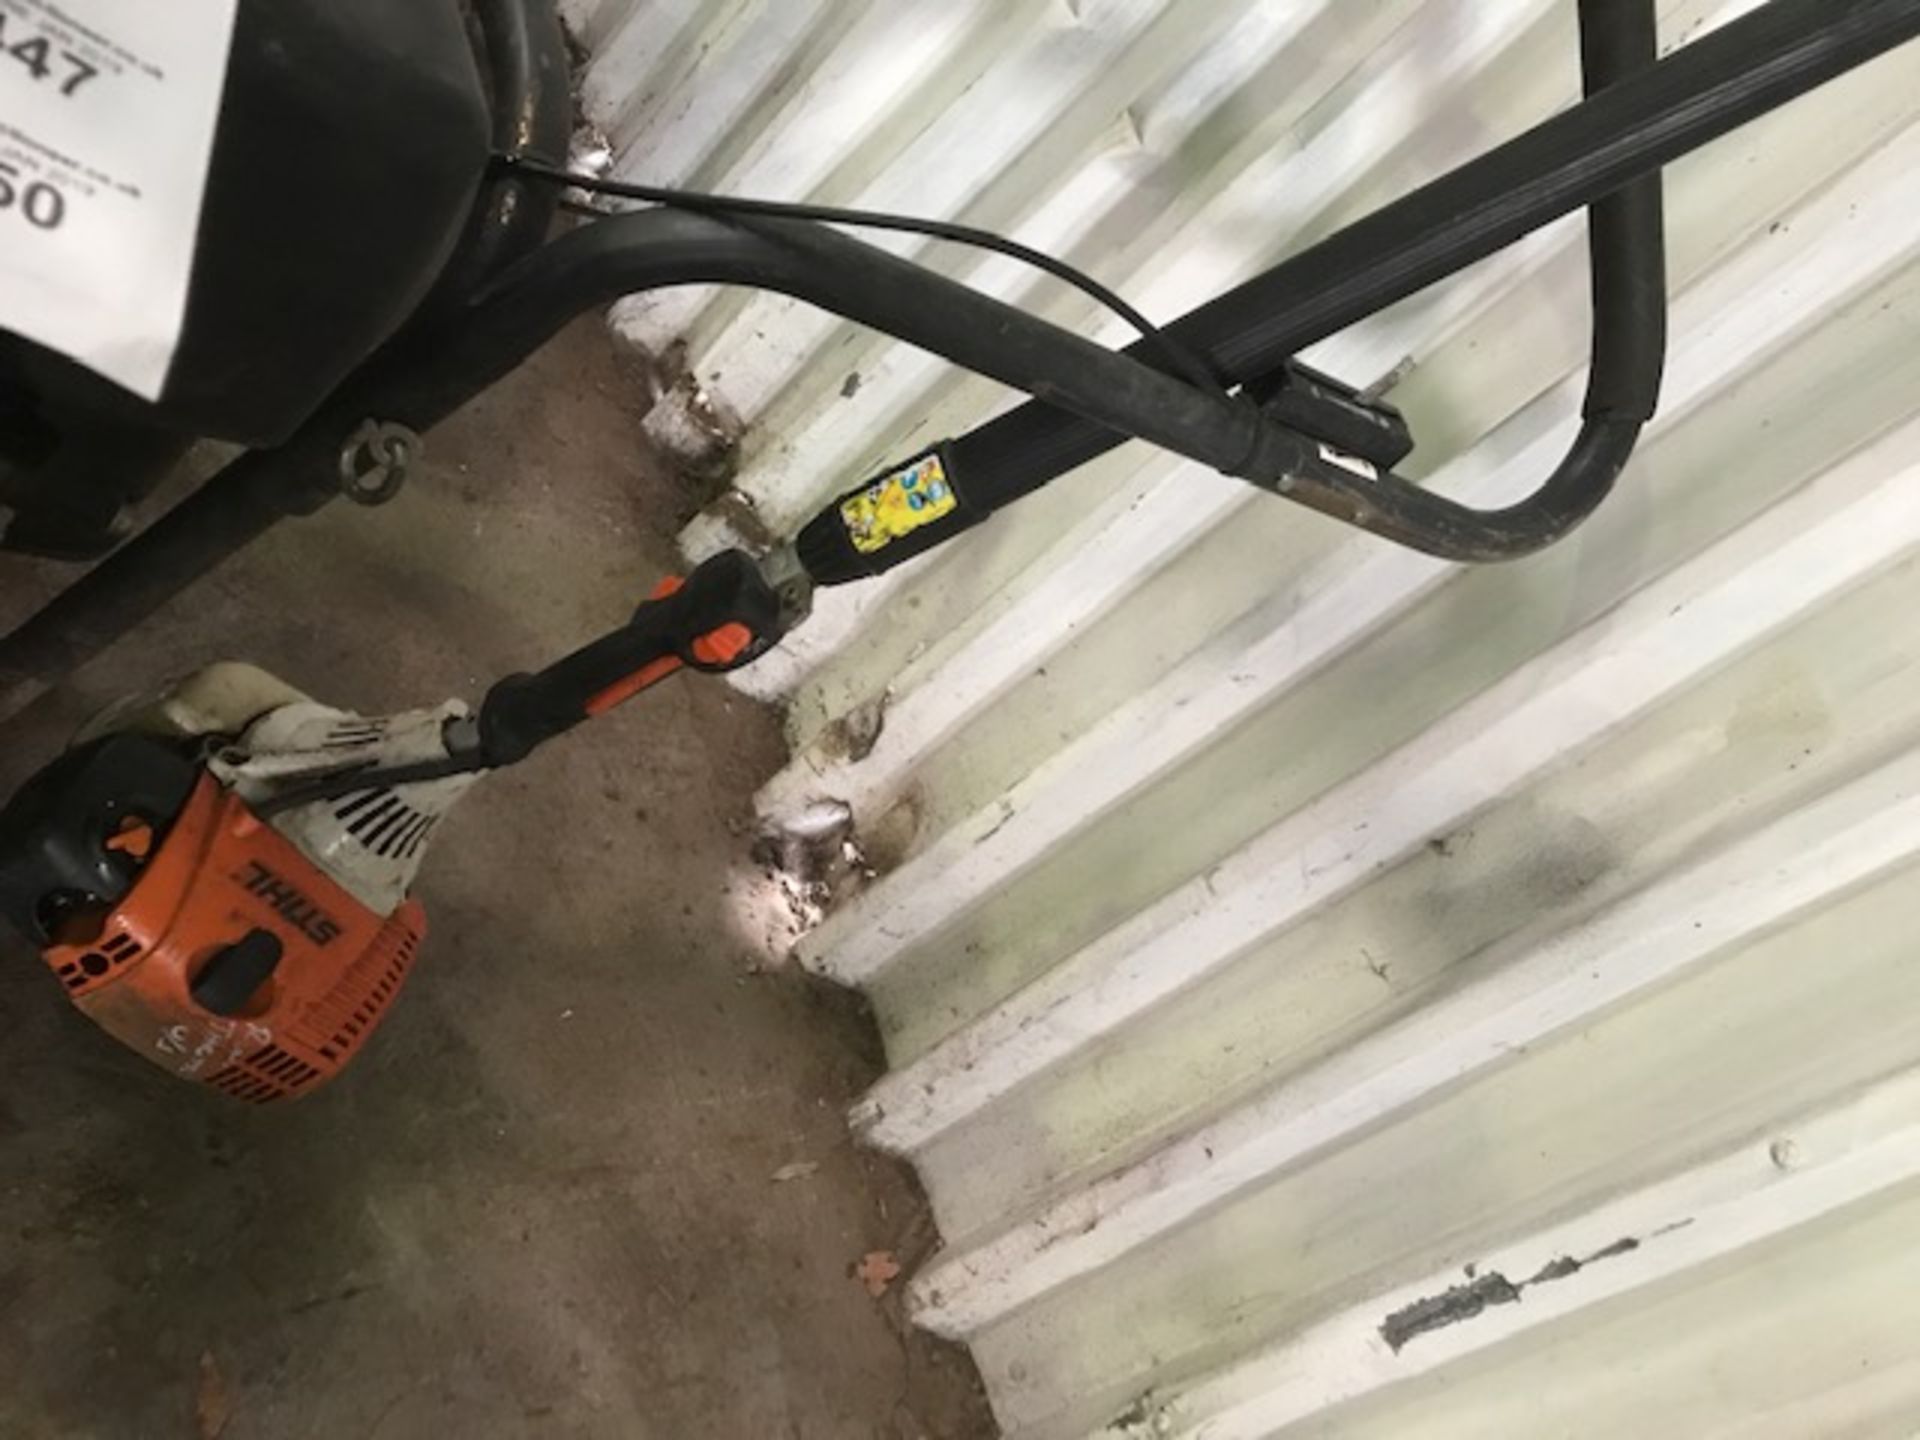 STIHL POLE SAW DRIVE UNIT..NO HEAD..THROTTLE NEEDS ATTENTION..WHEN TESTED WAS SEEN TO RUN AND